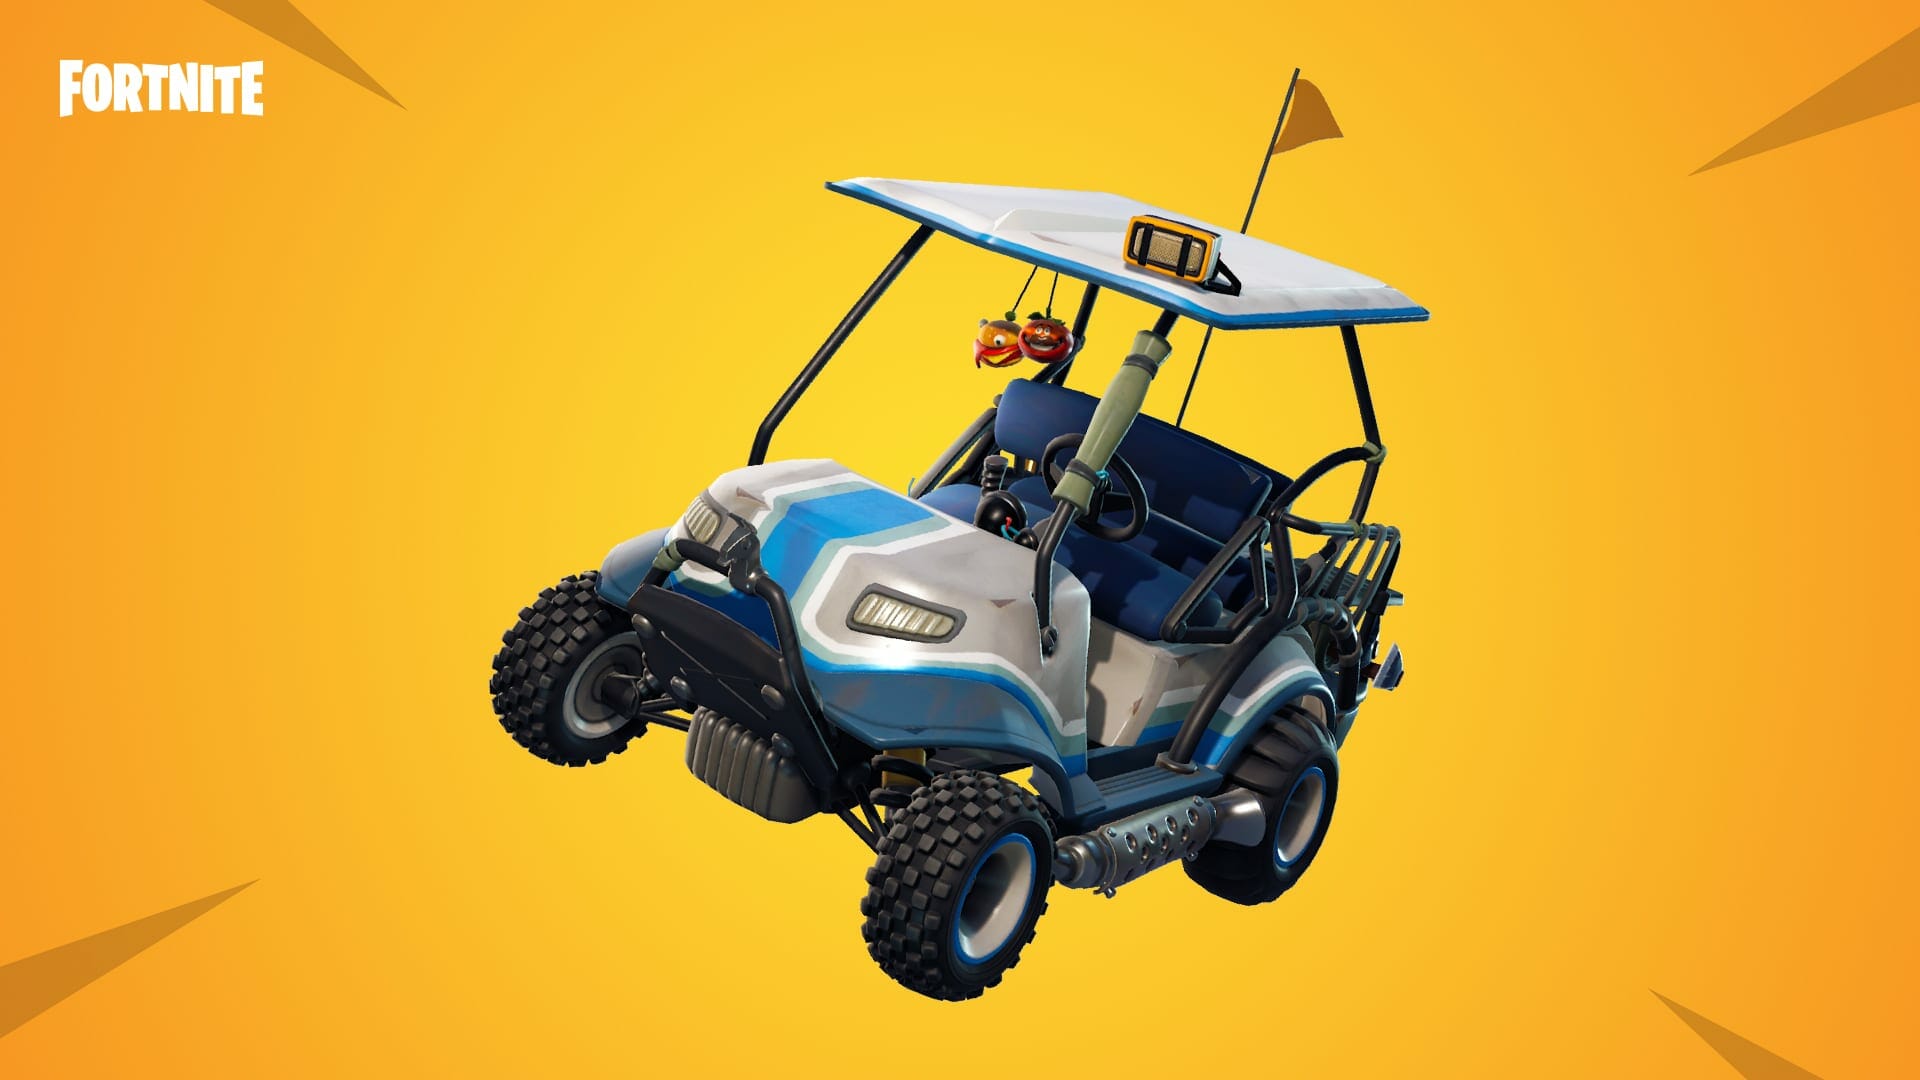 Vehicle Decorations Coming to Fortnite